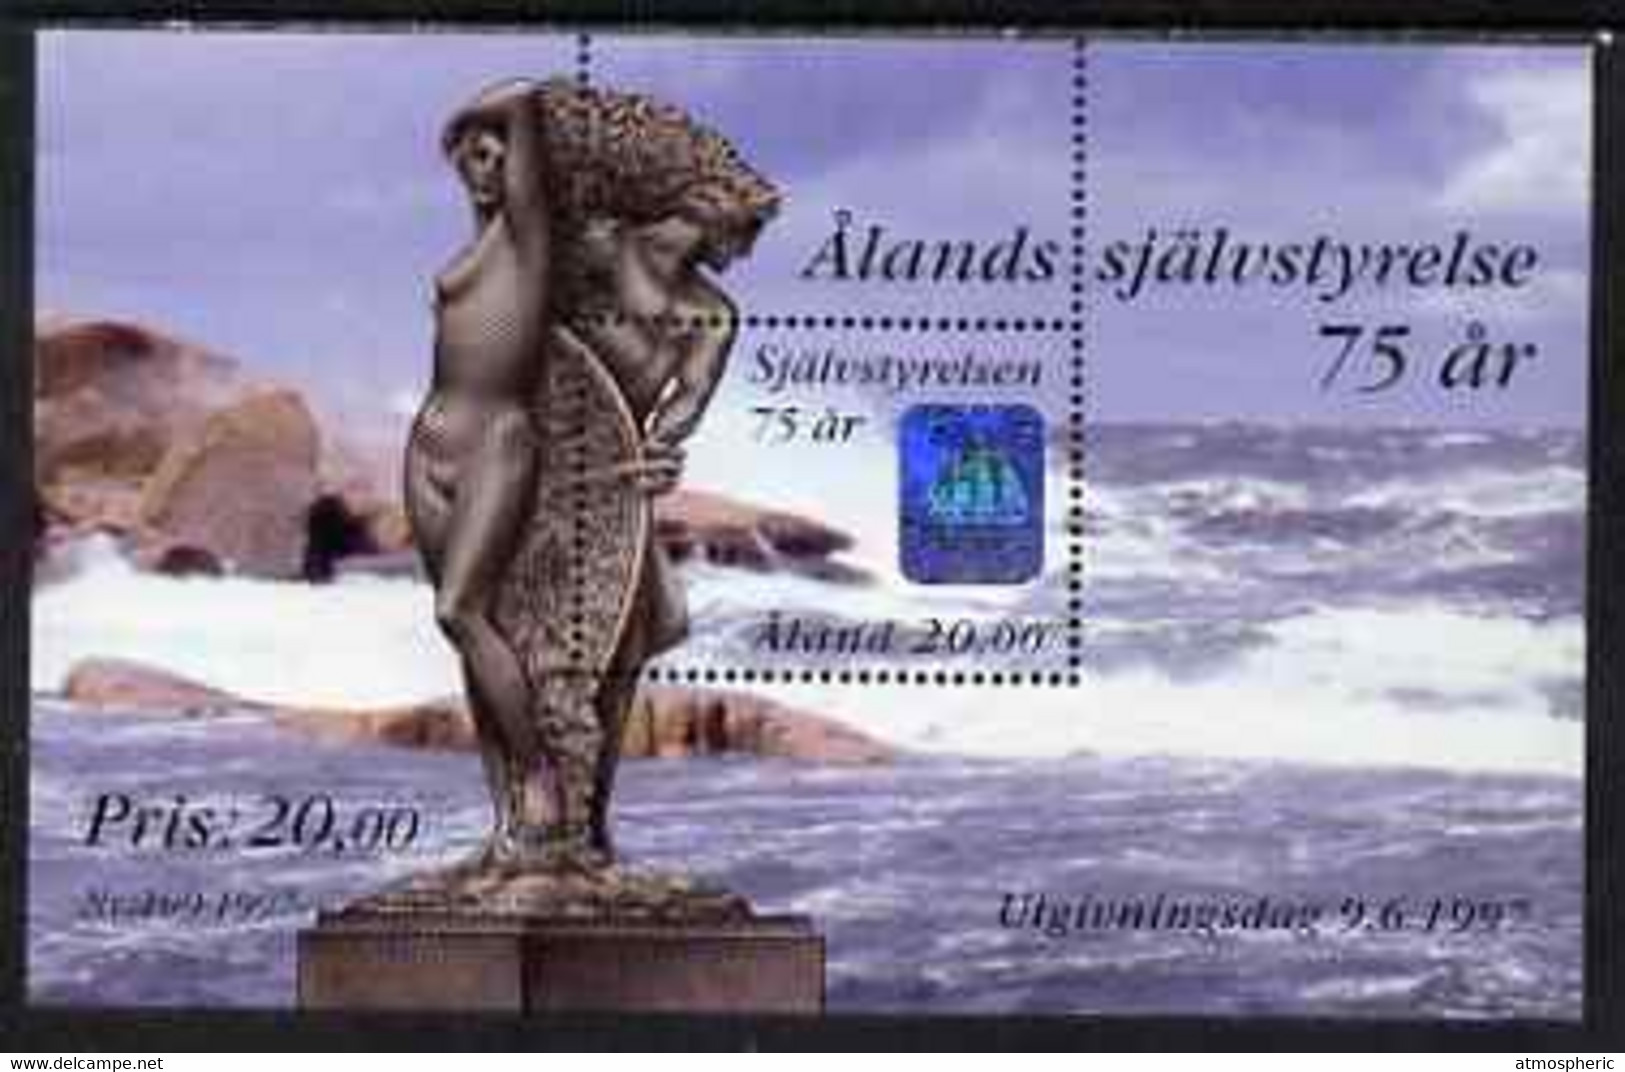 Aland Islands 1997 75th Anniversary Of Autonomy Perf M/sheet U/M SG MS 126 - Local Post Stamps